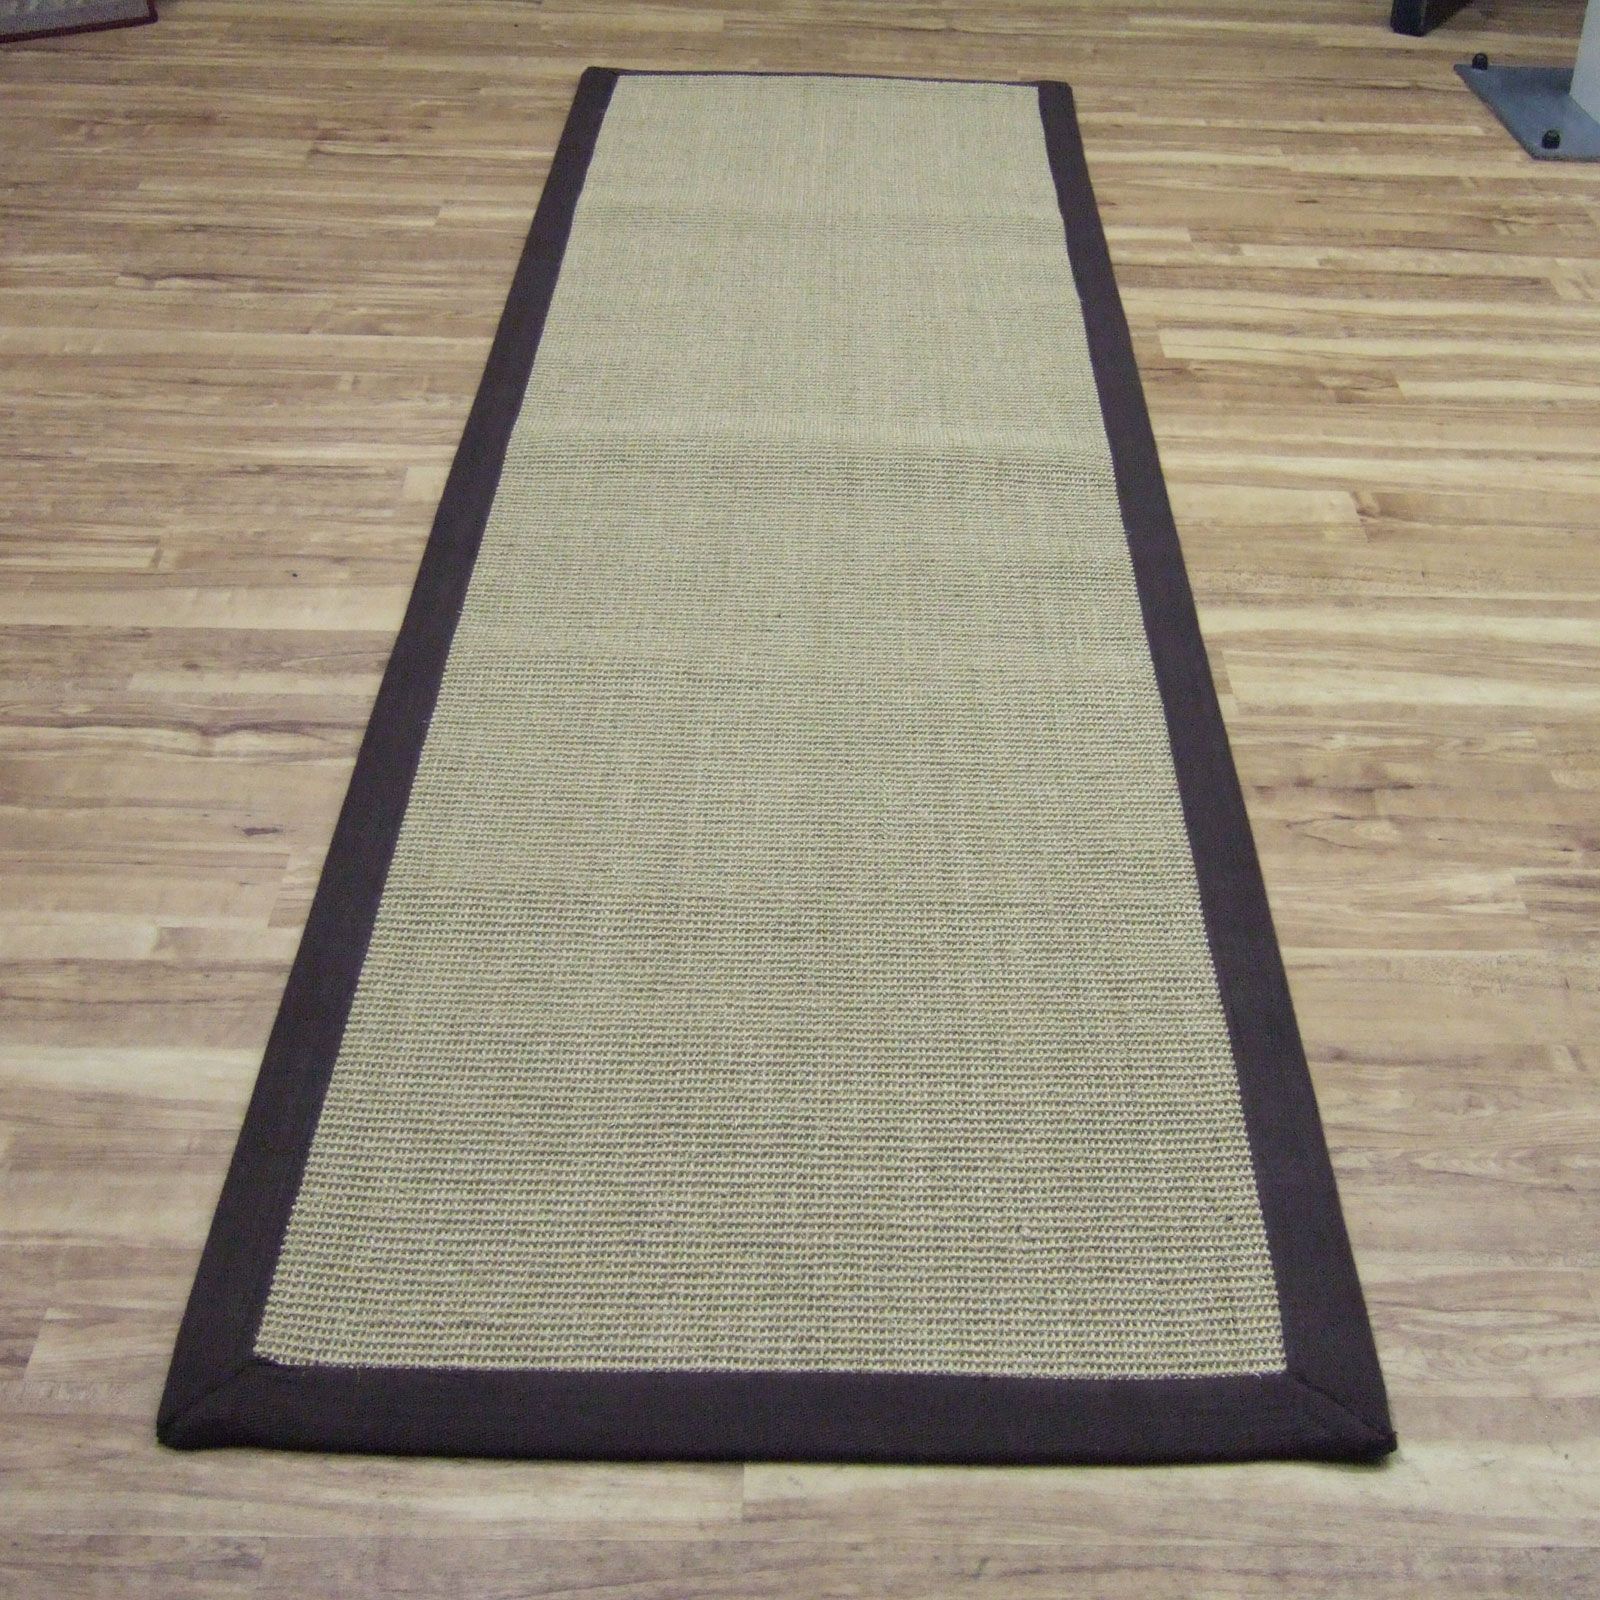 Beach Patrol Dogs Indoor Outdoor Rugs Liora Manne Creative Intended For Hallway Runners For Dogs (View 5 of 20)